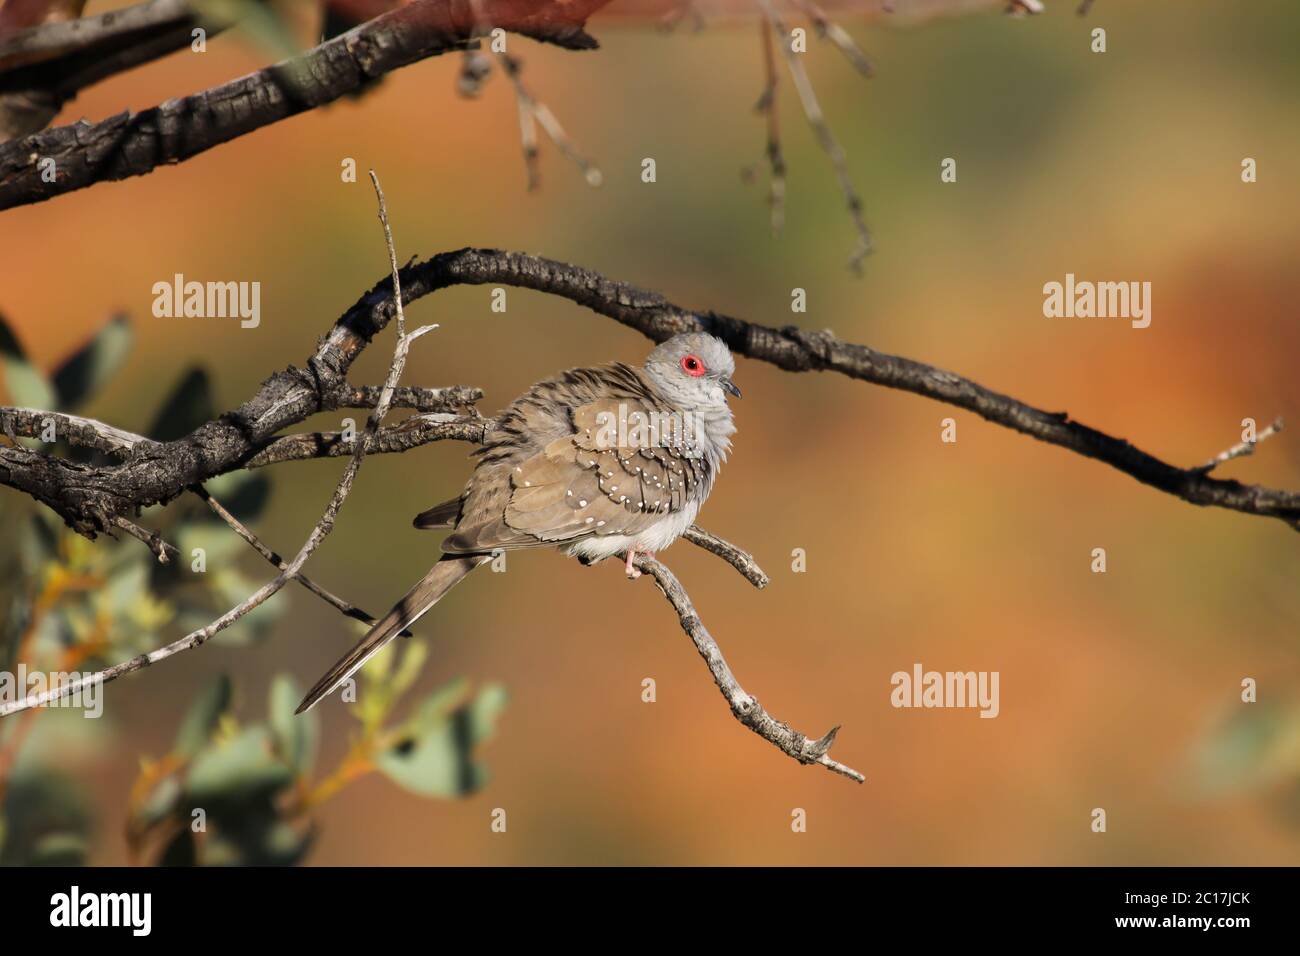 Diamond dove sitting on a branch, Kings Canyon, Northern Territory Stock Photo